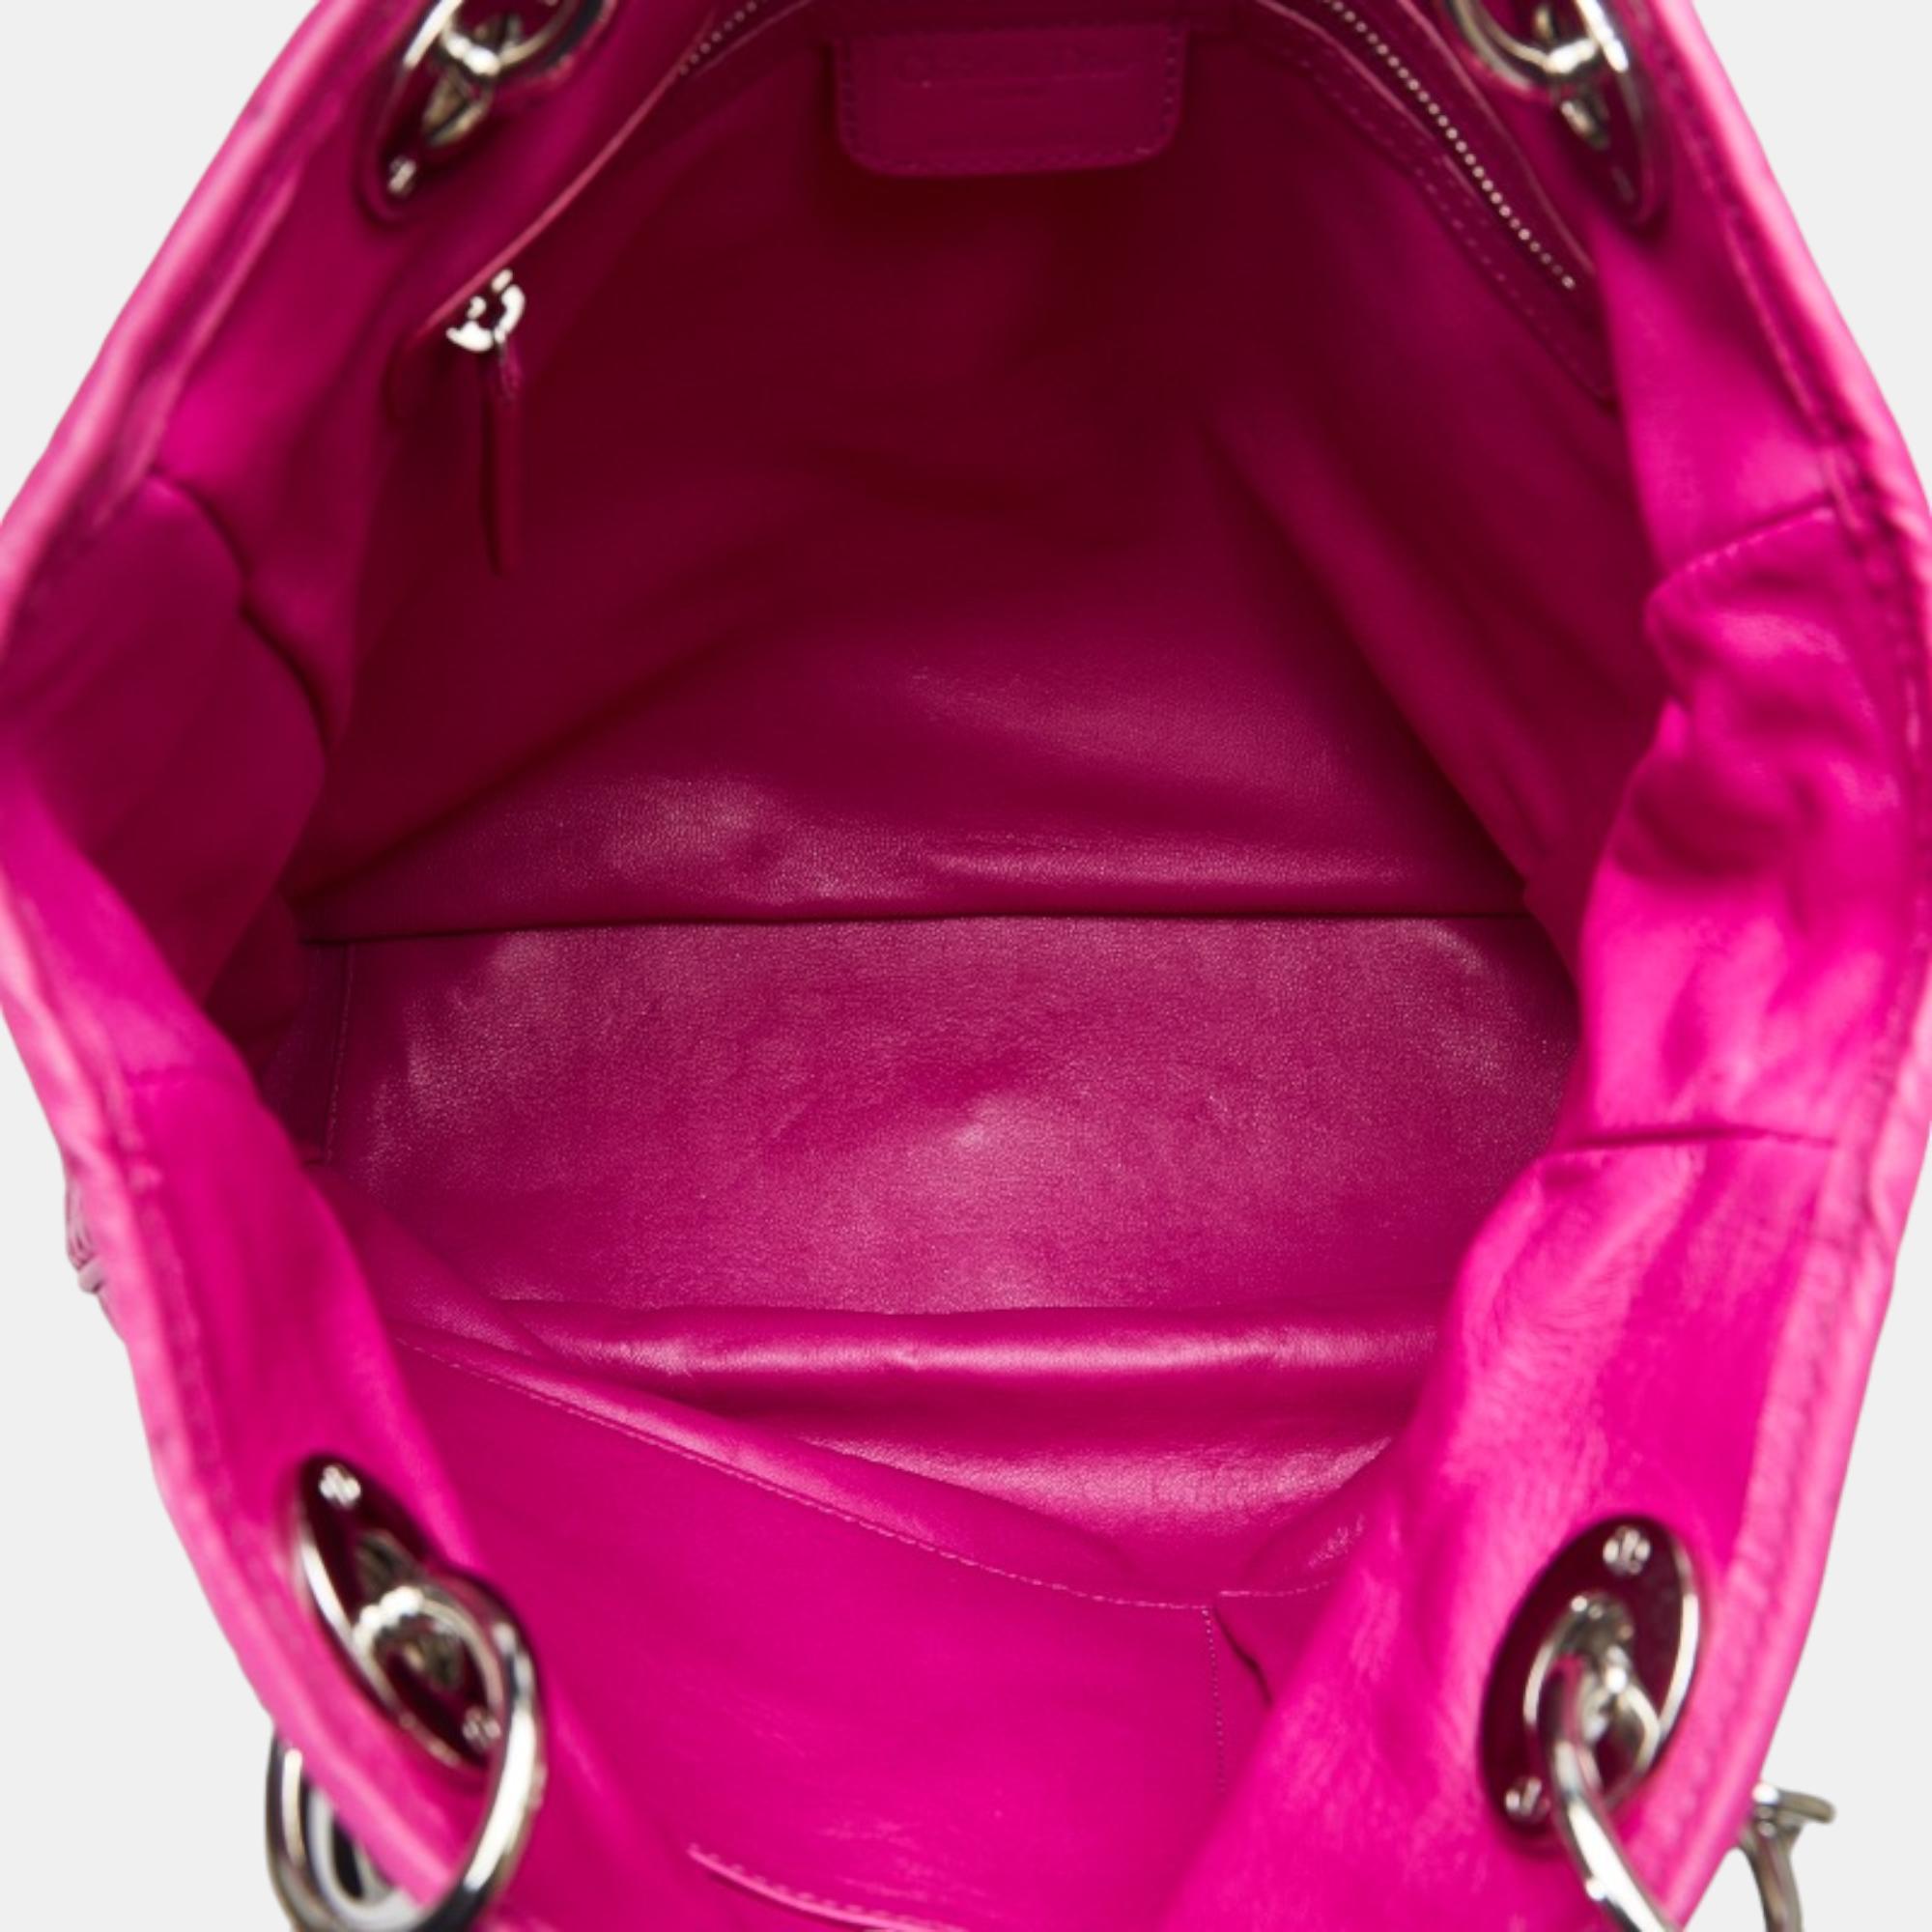 Dior Pink Woven Leather Chain Tote